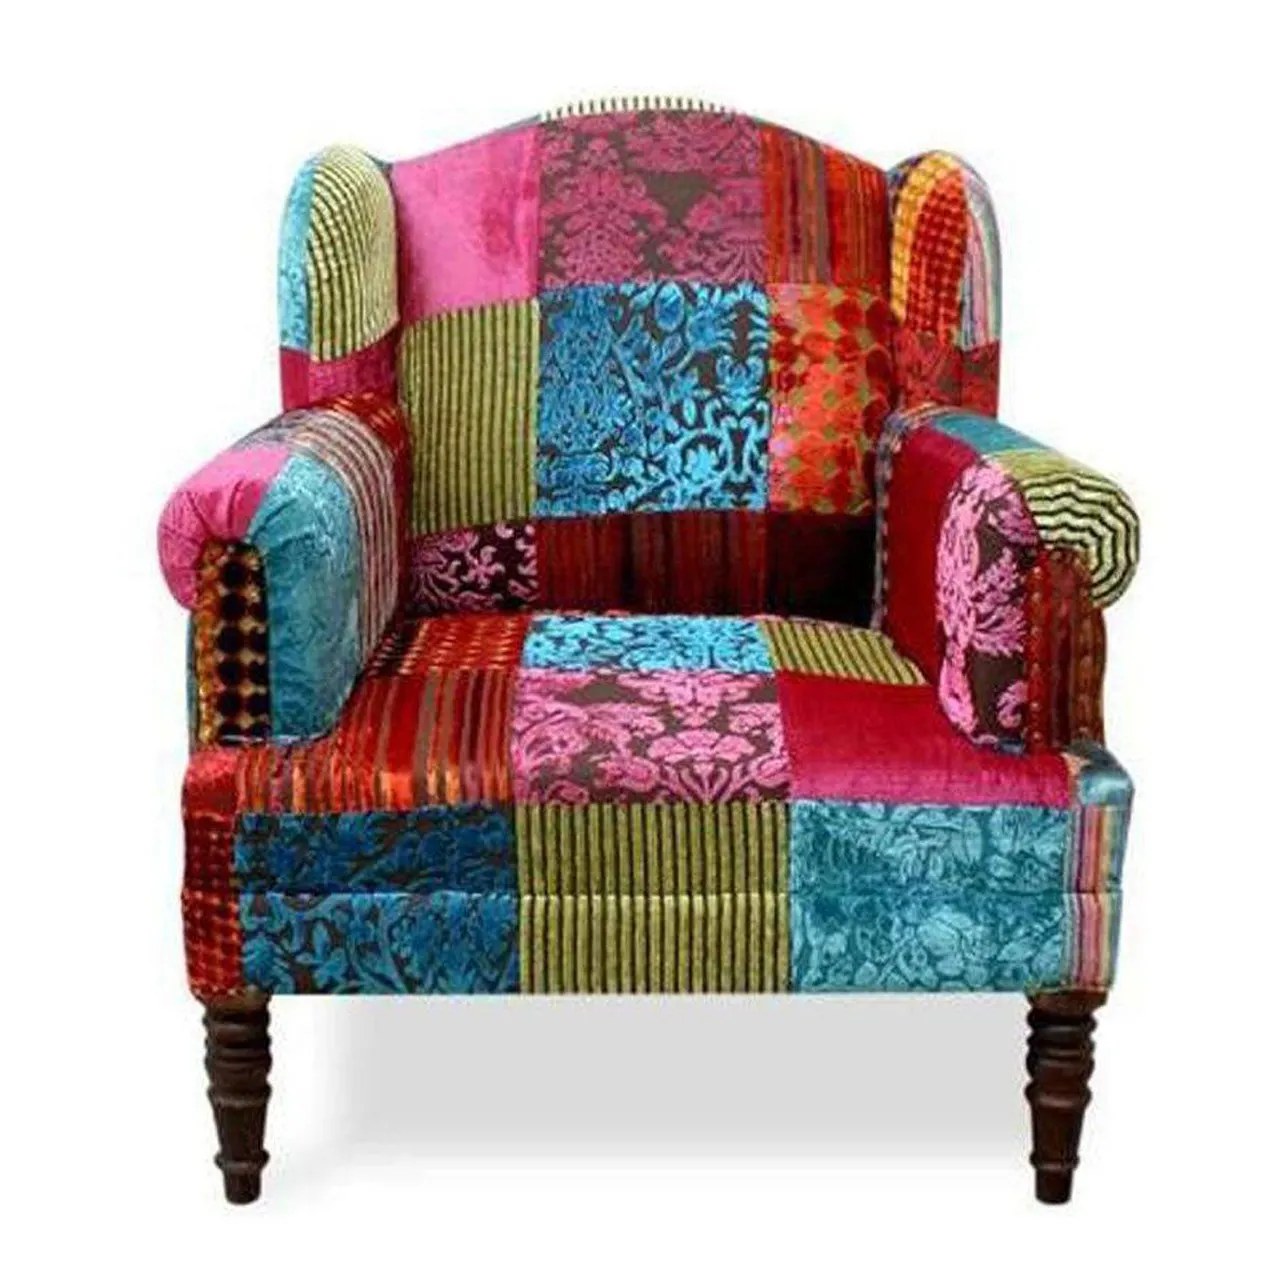 Armchair Patchwork Rayon Velvet Patch Living Room Furniture Home Decor Maharaja Wing Chair